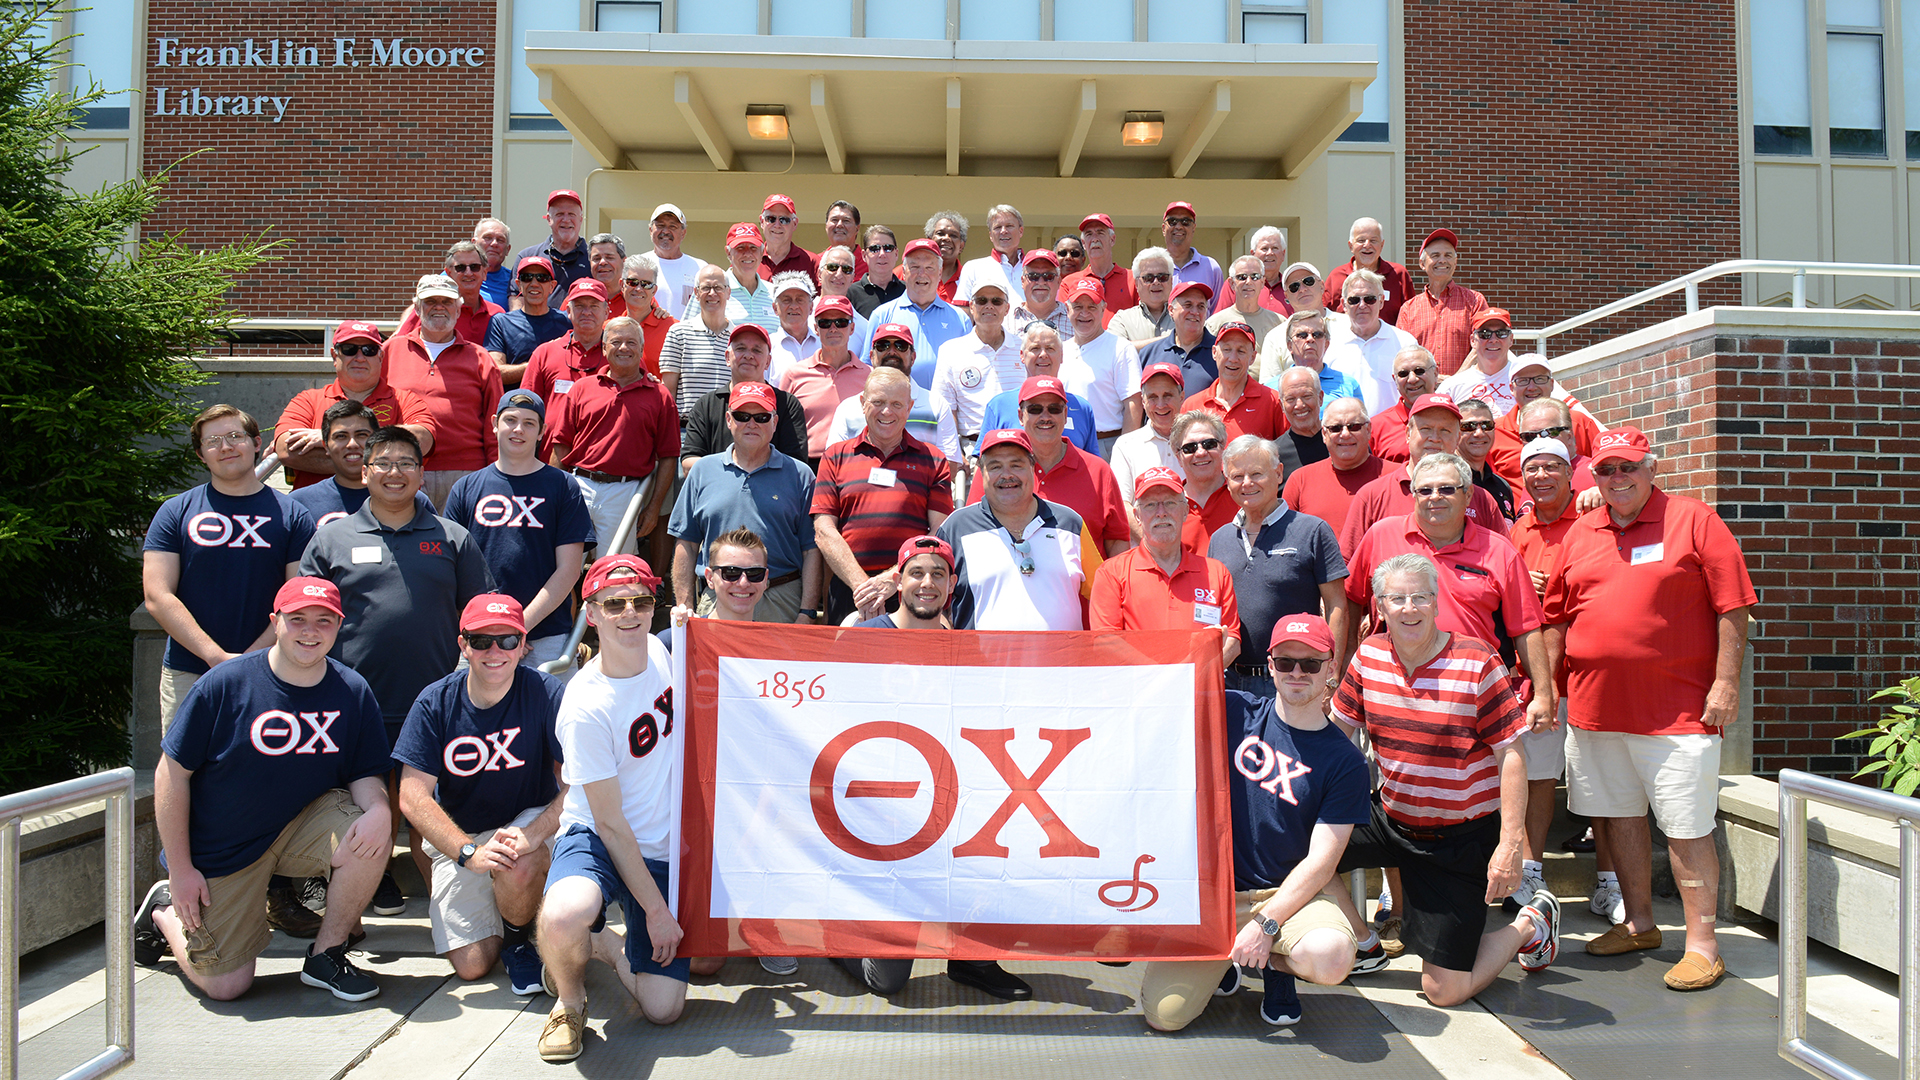 Members of Theta Chi fraternity at 2017 Rider Reunions